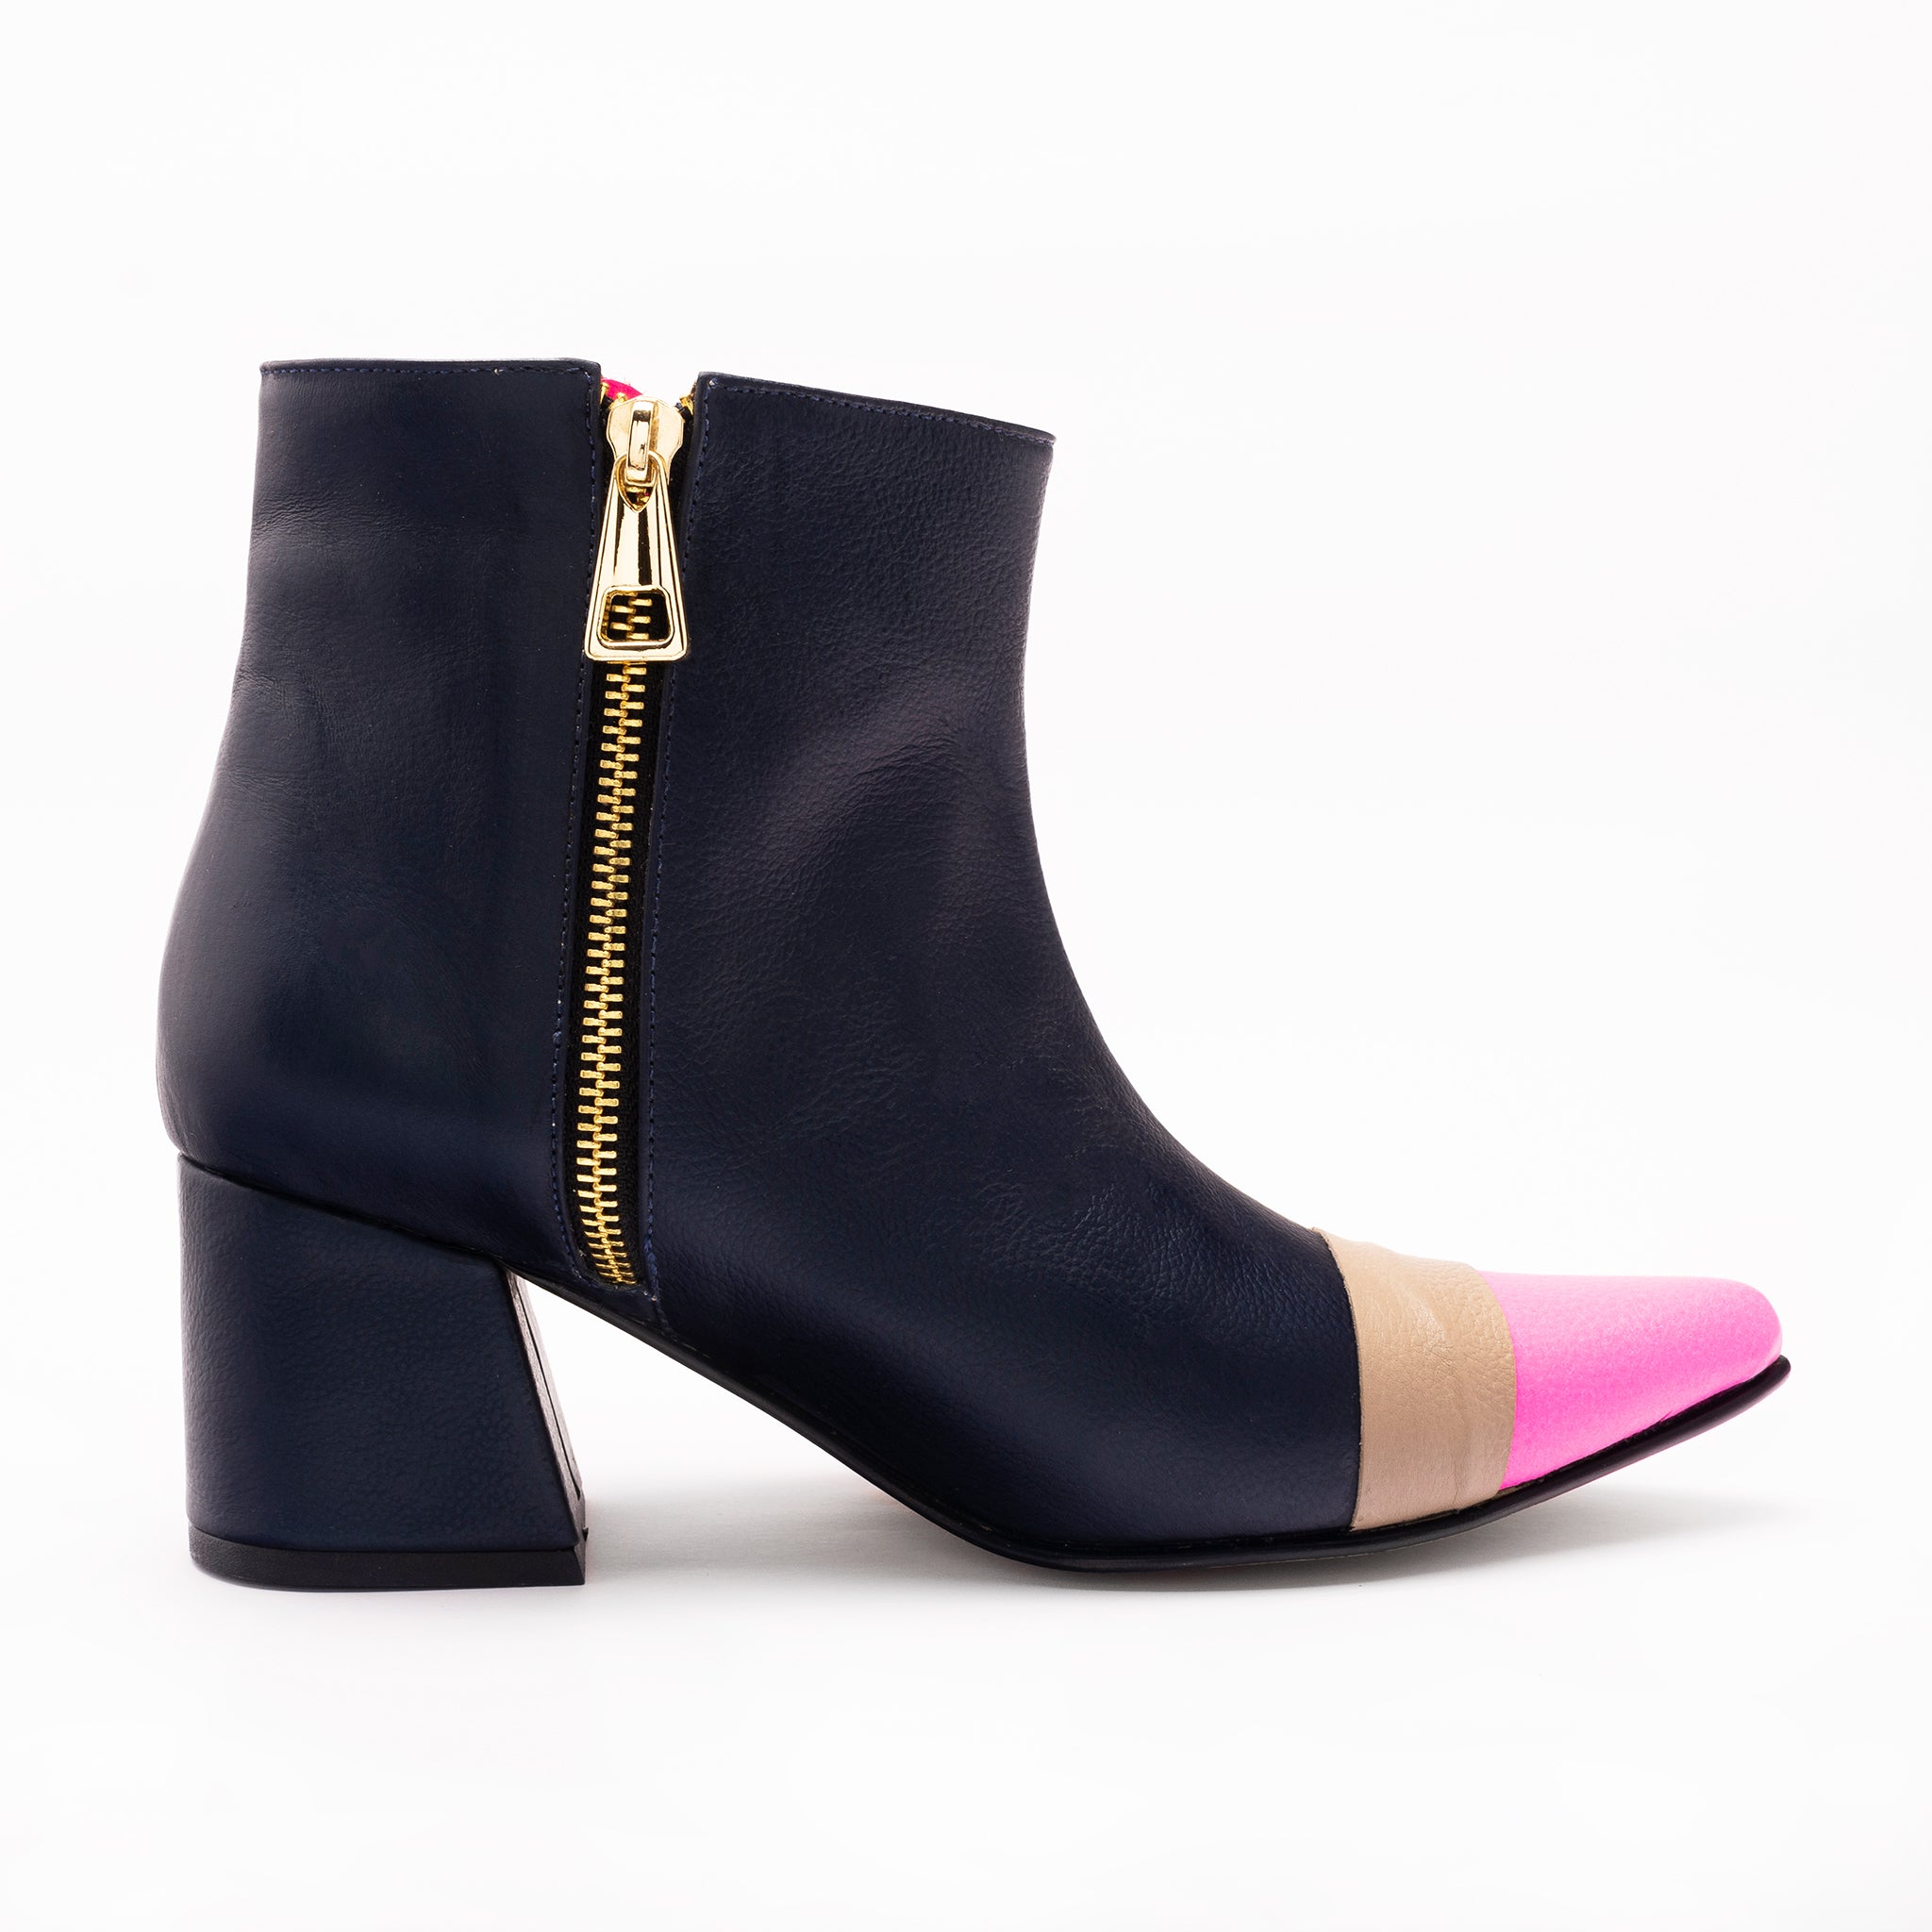 ANKLE boots - NAVY blue + ROSA chicle  NEÓN + cocoa